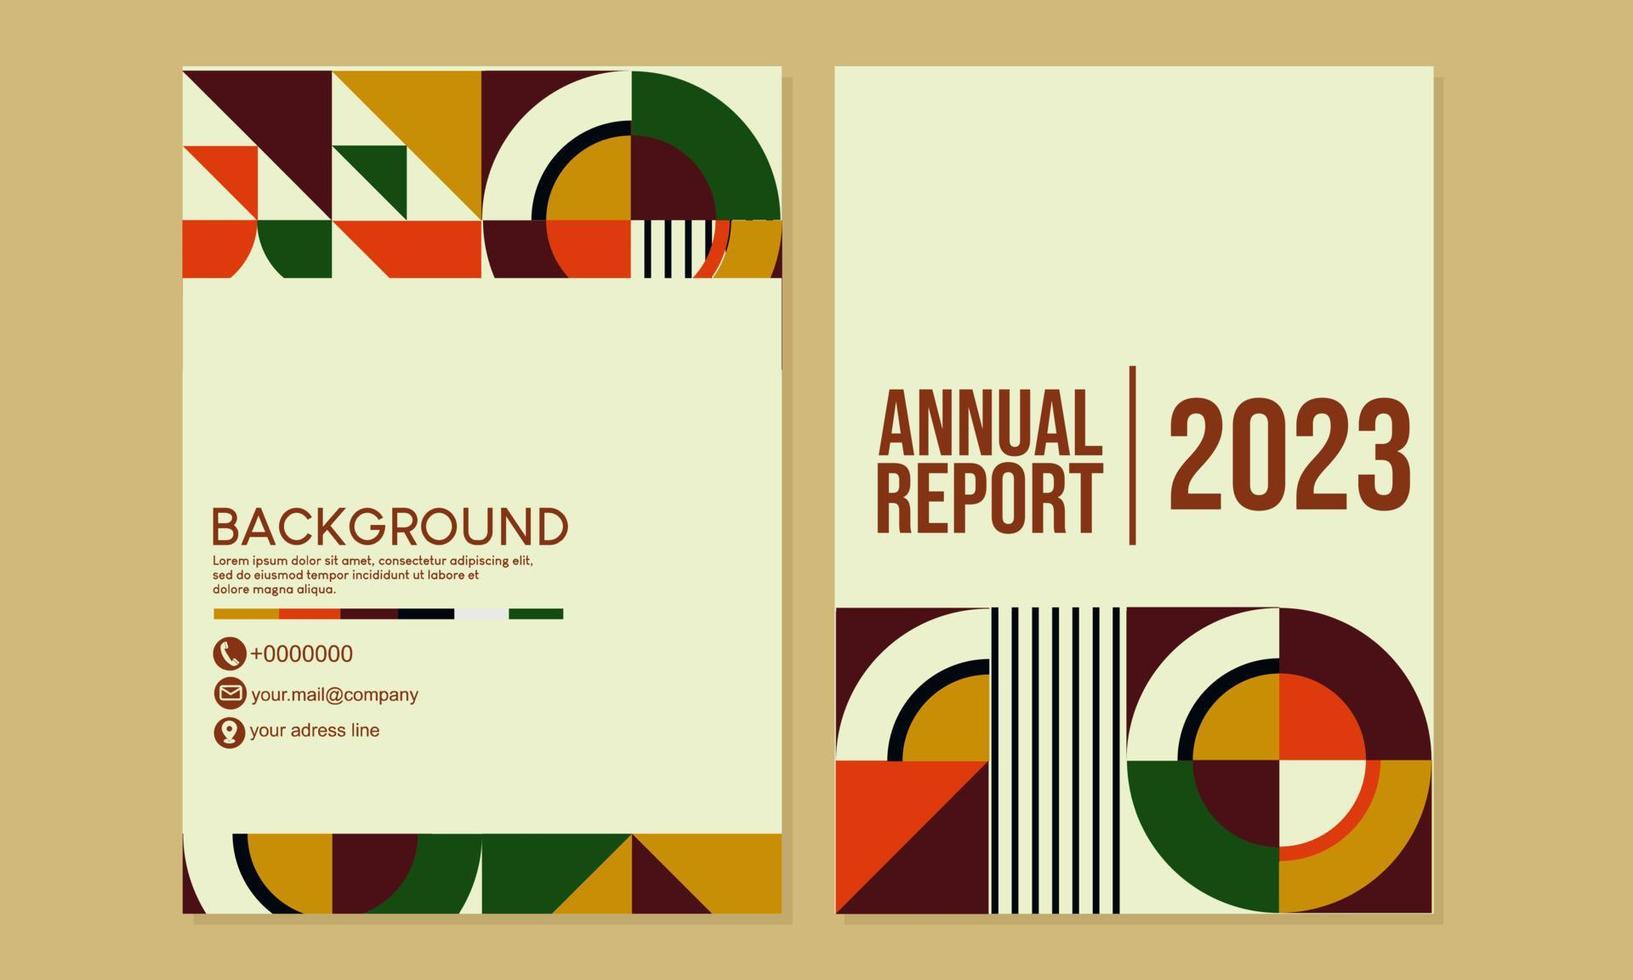 Bauhaus retro annual report cover design set. Abstract geometric pattern background. A4 cover for business books, journals, cards, catalogs, posters, flyers, banners vector